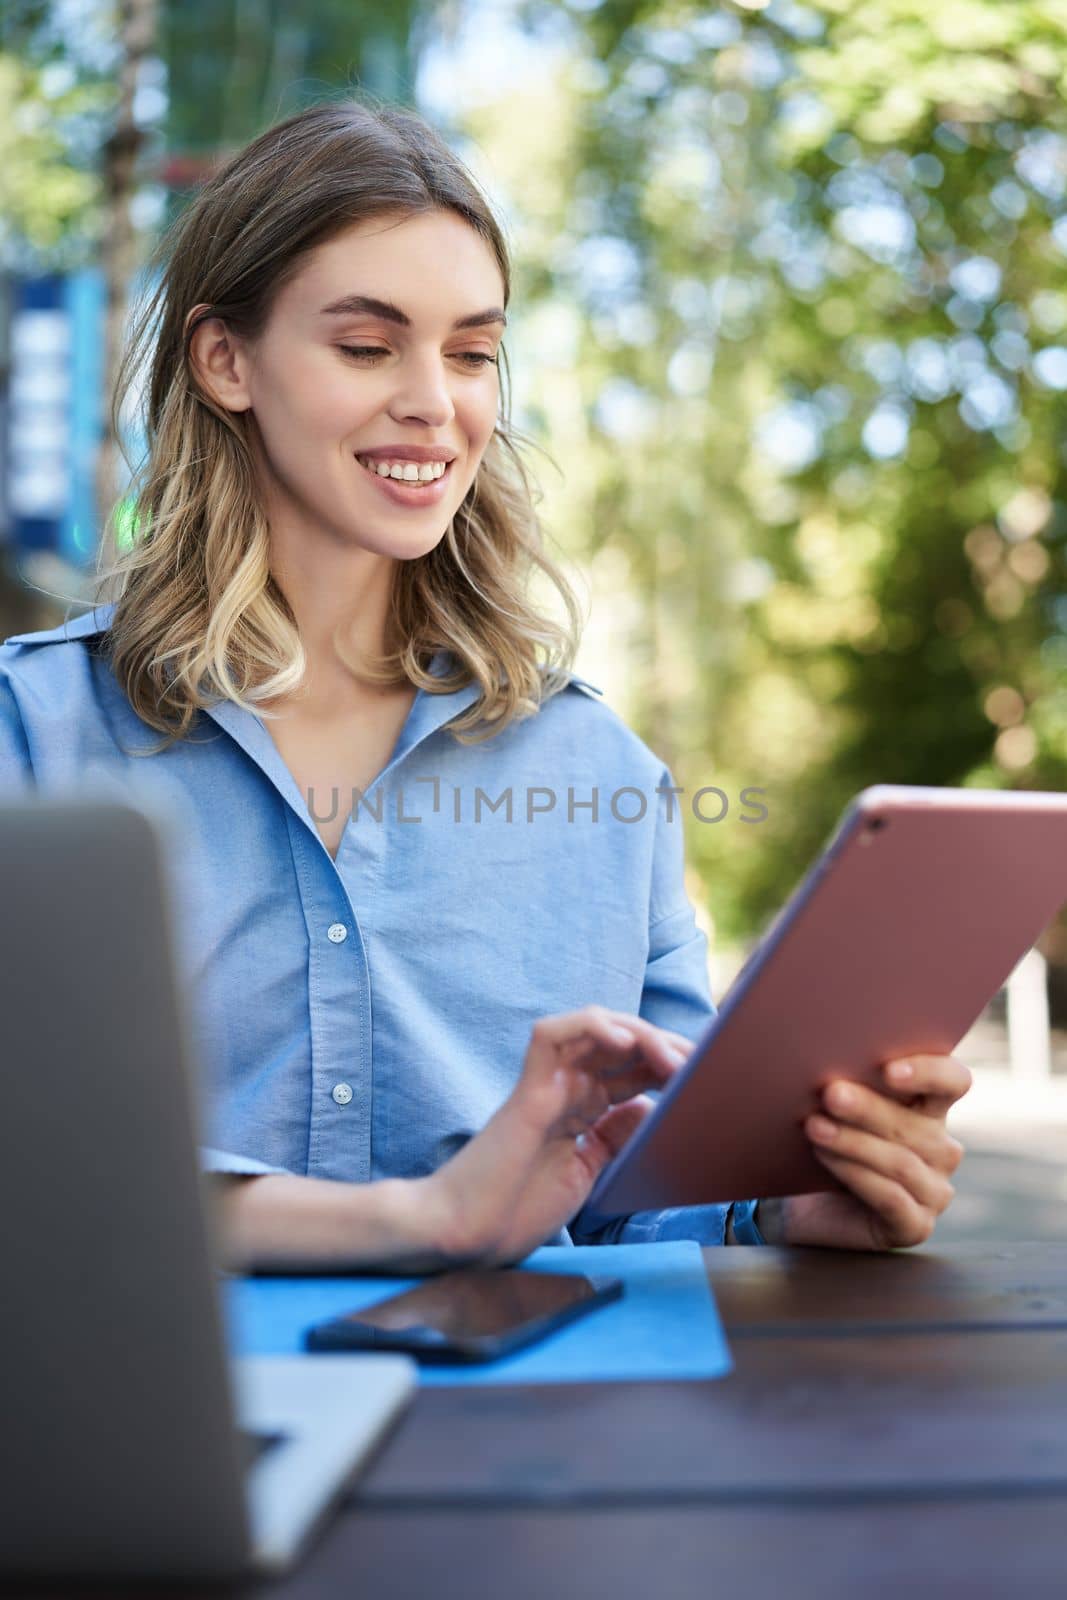 Vetical shot of young female student, reading on digital tablet, studying outdoors. Businesswoman sitting outside with laptop and gadgets, working.